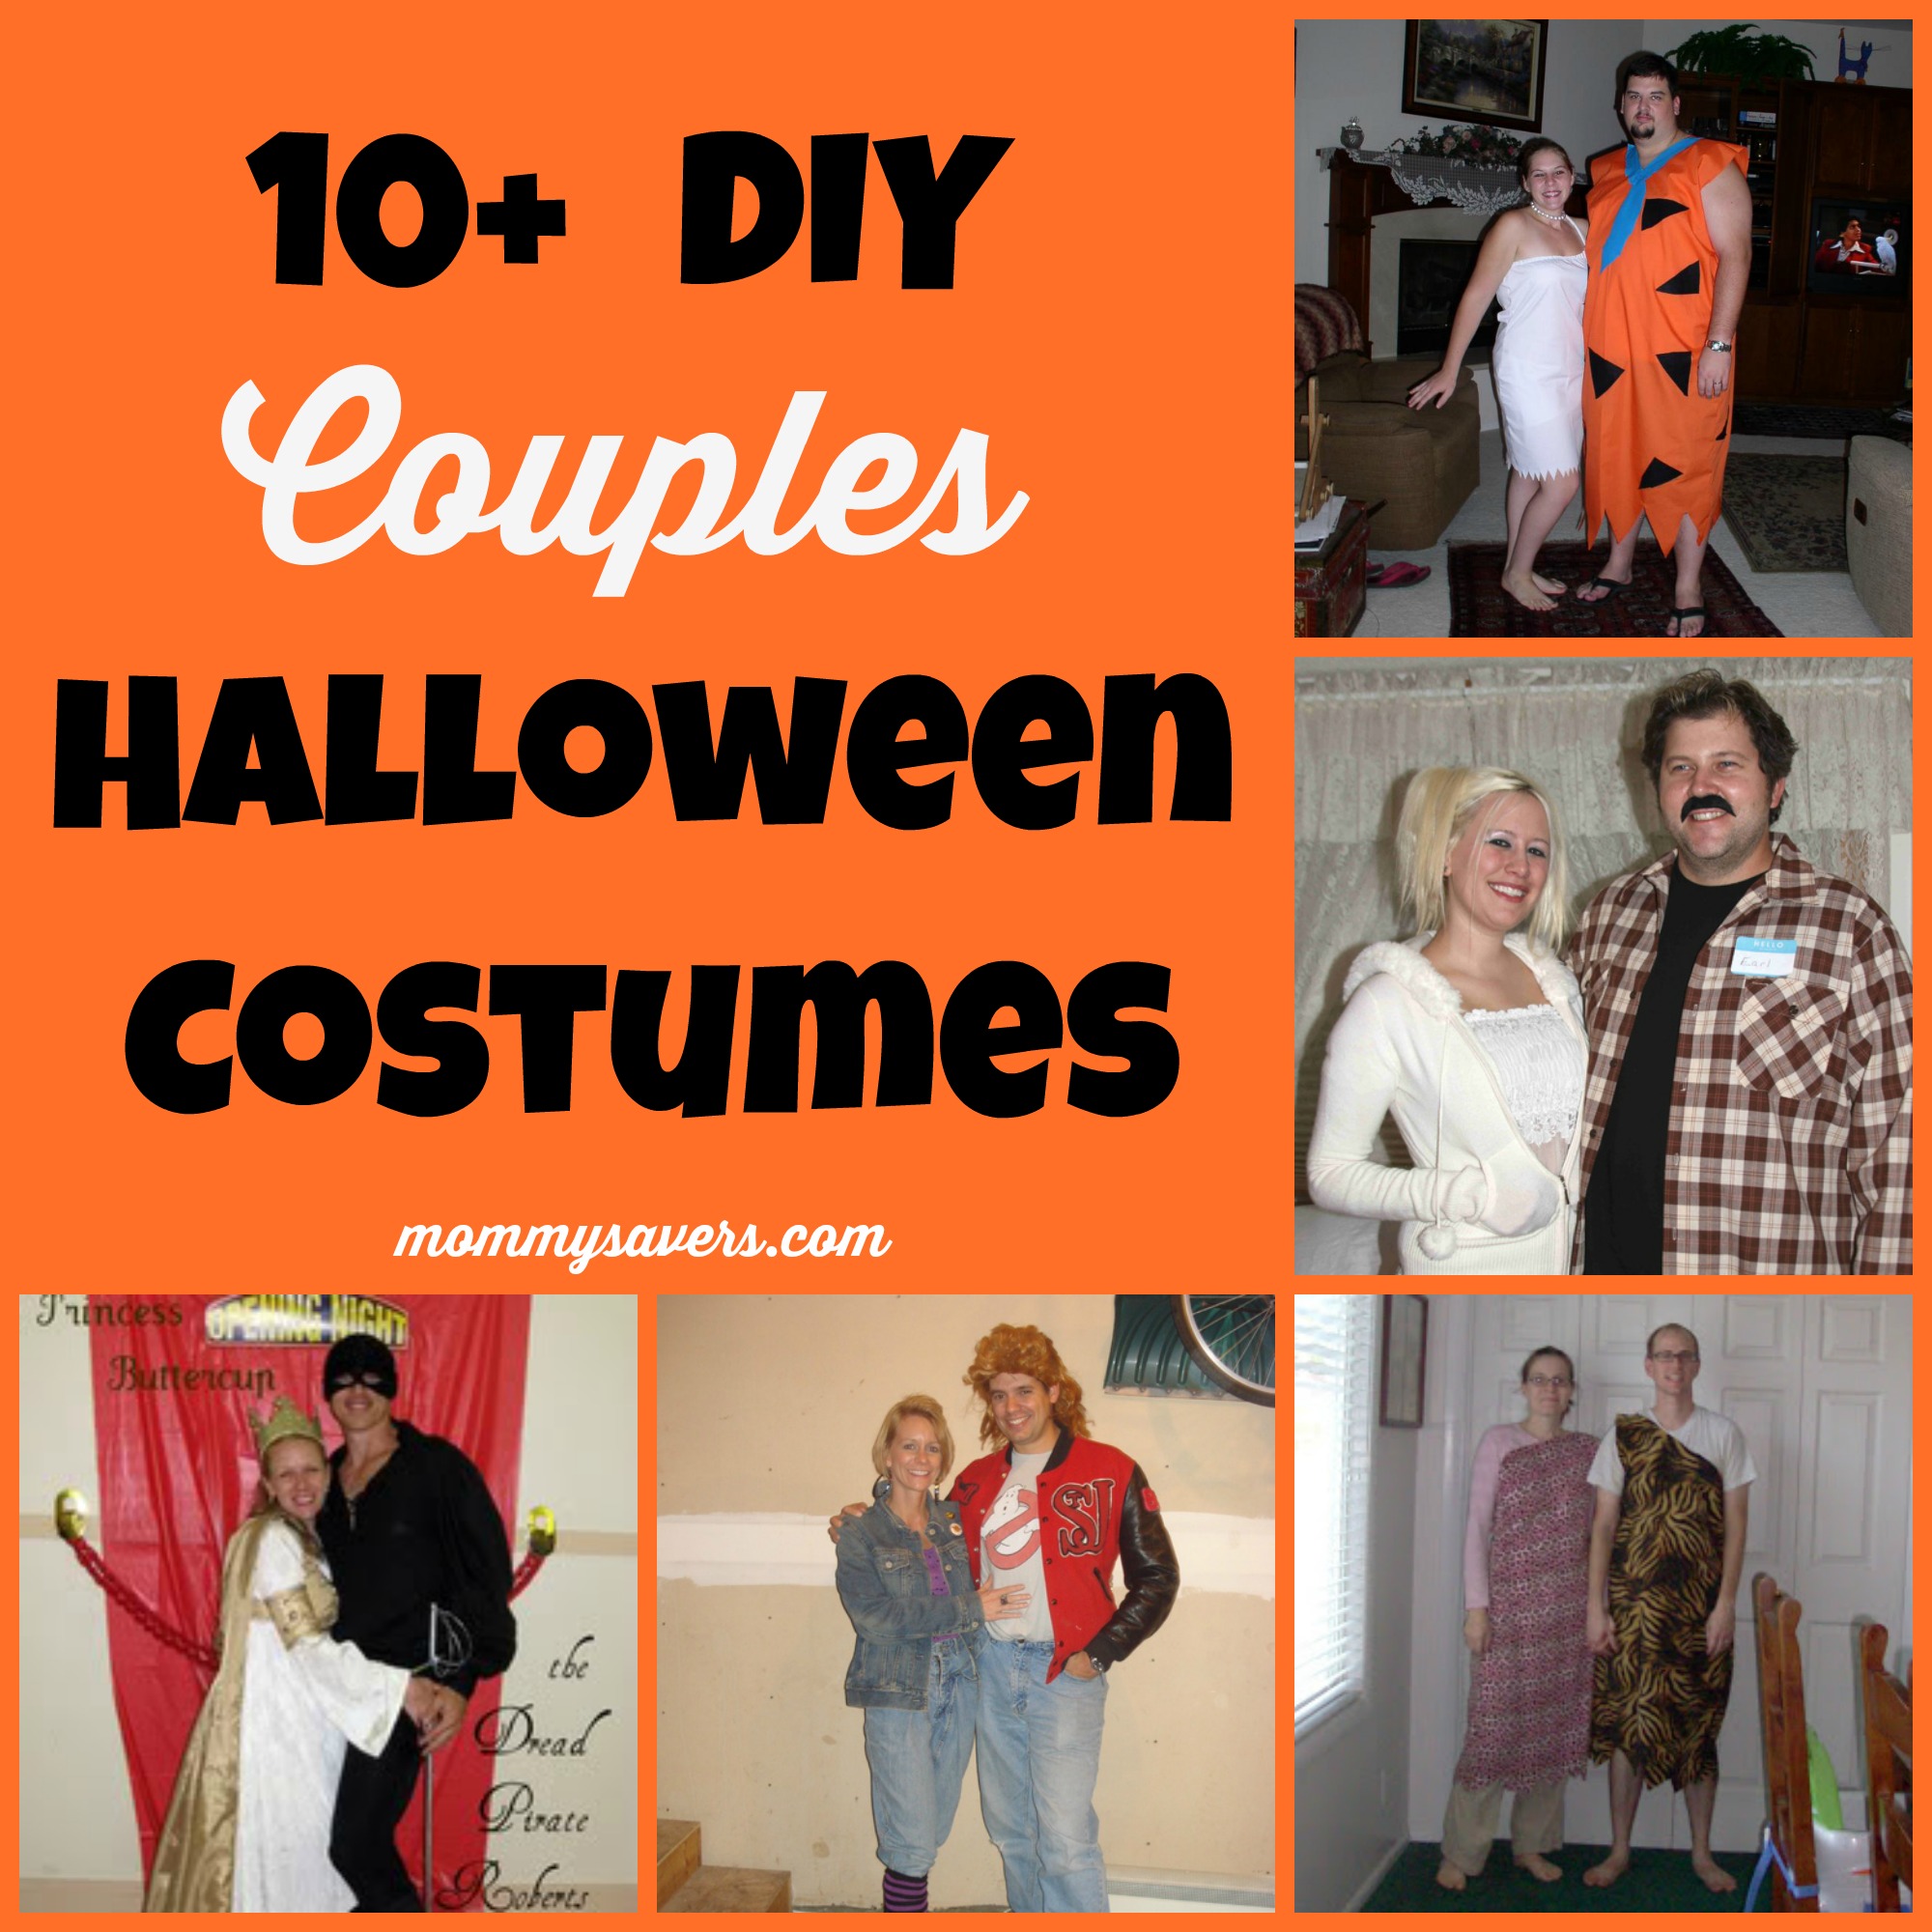 easy diy occasions    costumes diy fashion couples diy couples projects halloween special halloween costumes